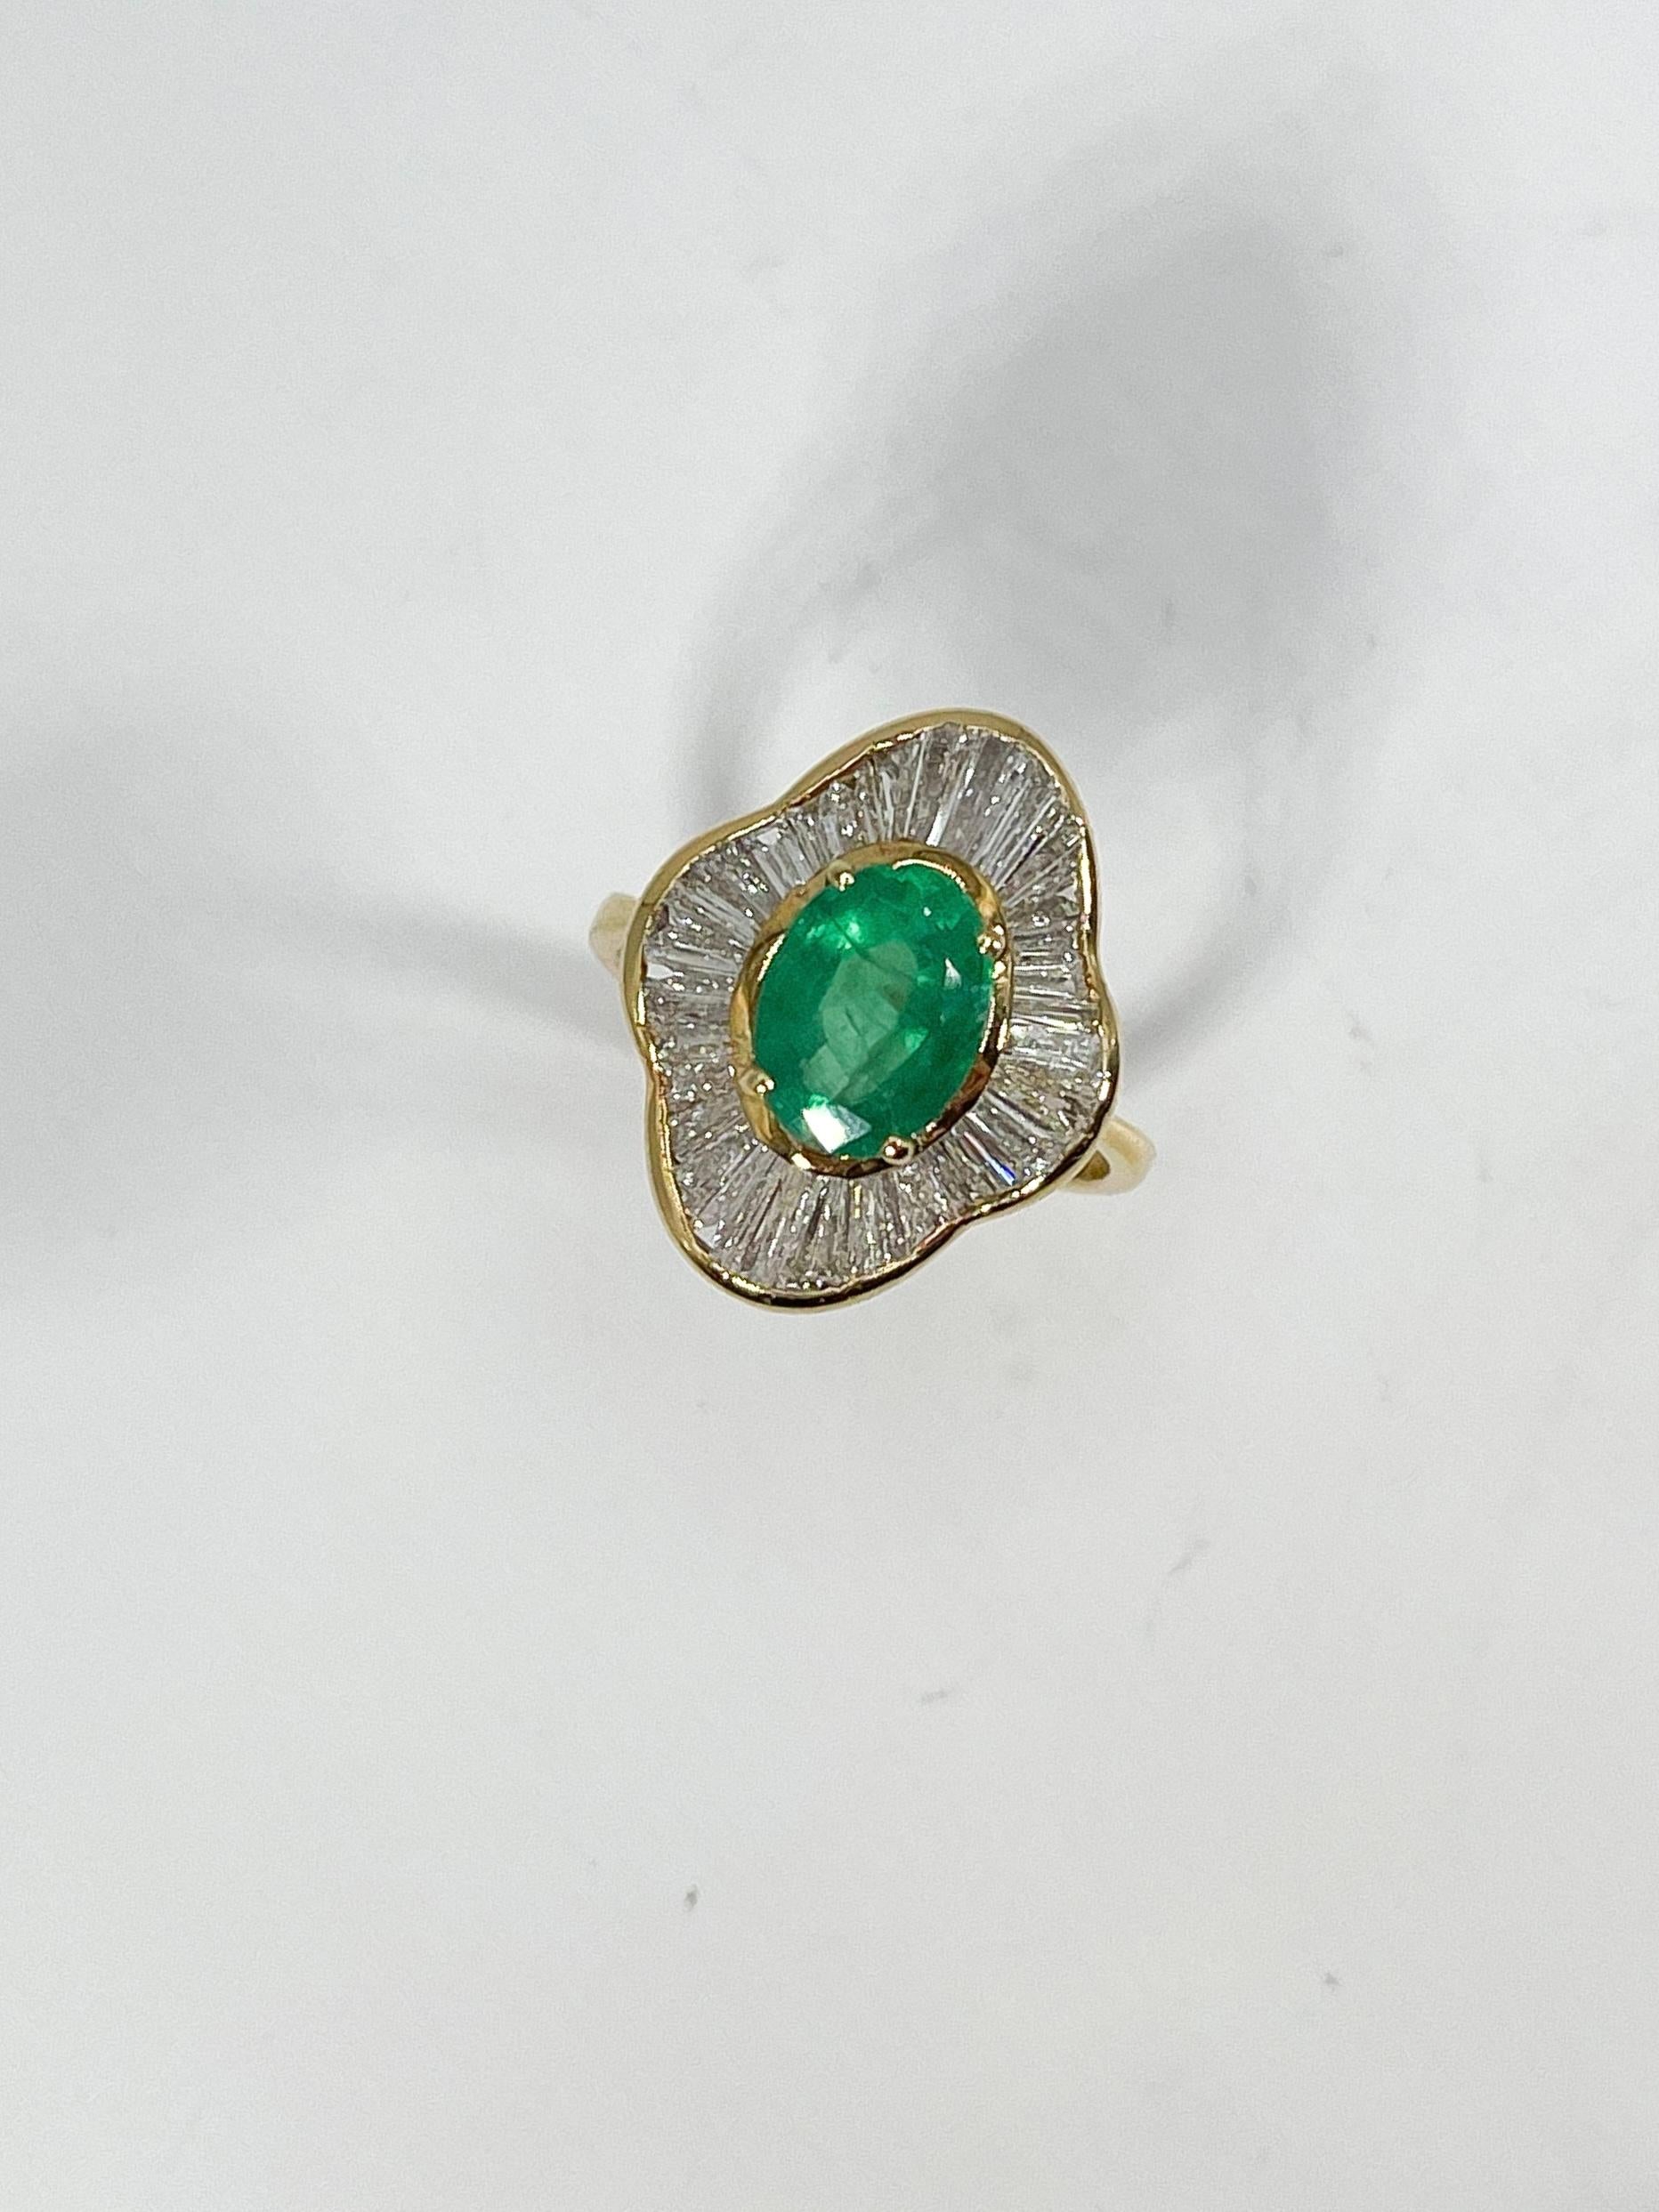 14k yellow gold 2 CT oval emerald and 1 CTW diamond ballerina ring. The emerald is an oval, the diamonds are all baguettes, the size of the ring is a 6 1/4, and it has a total weight of 5.2 grams.